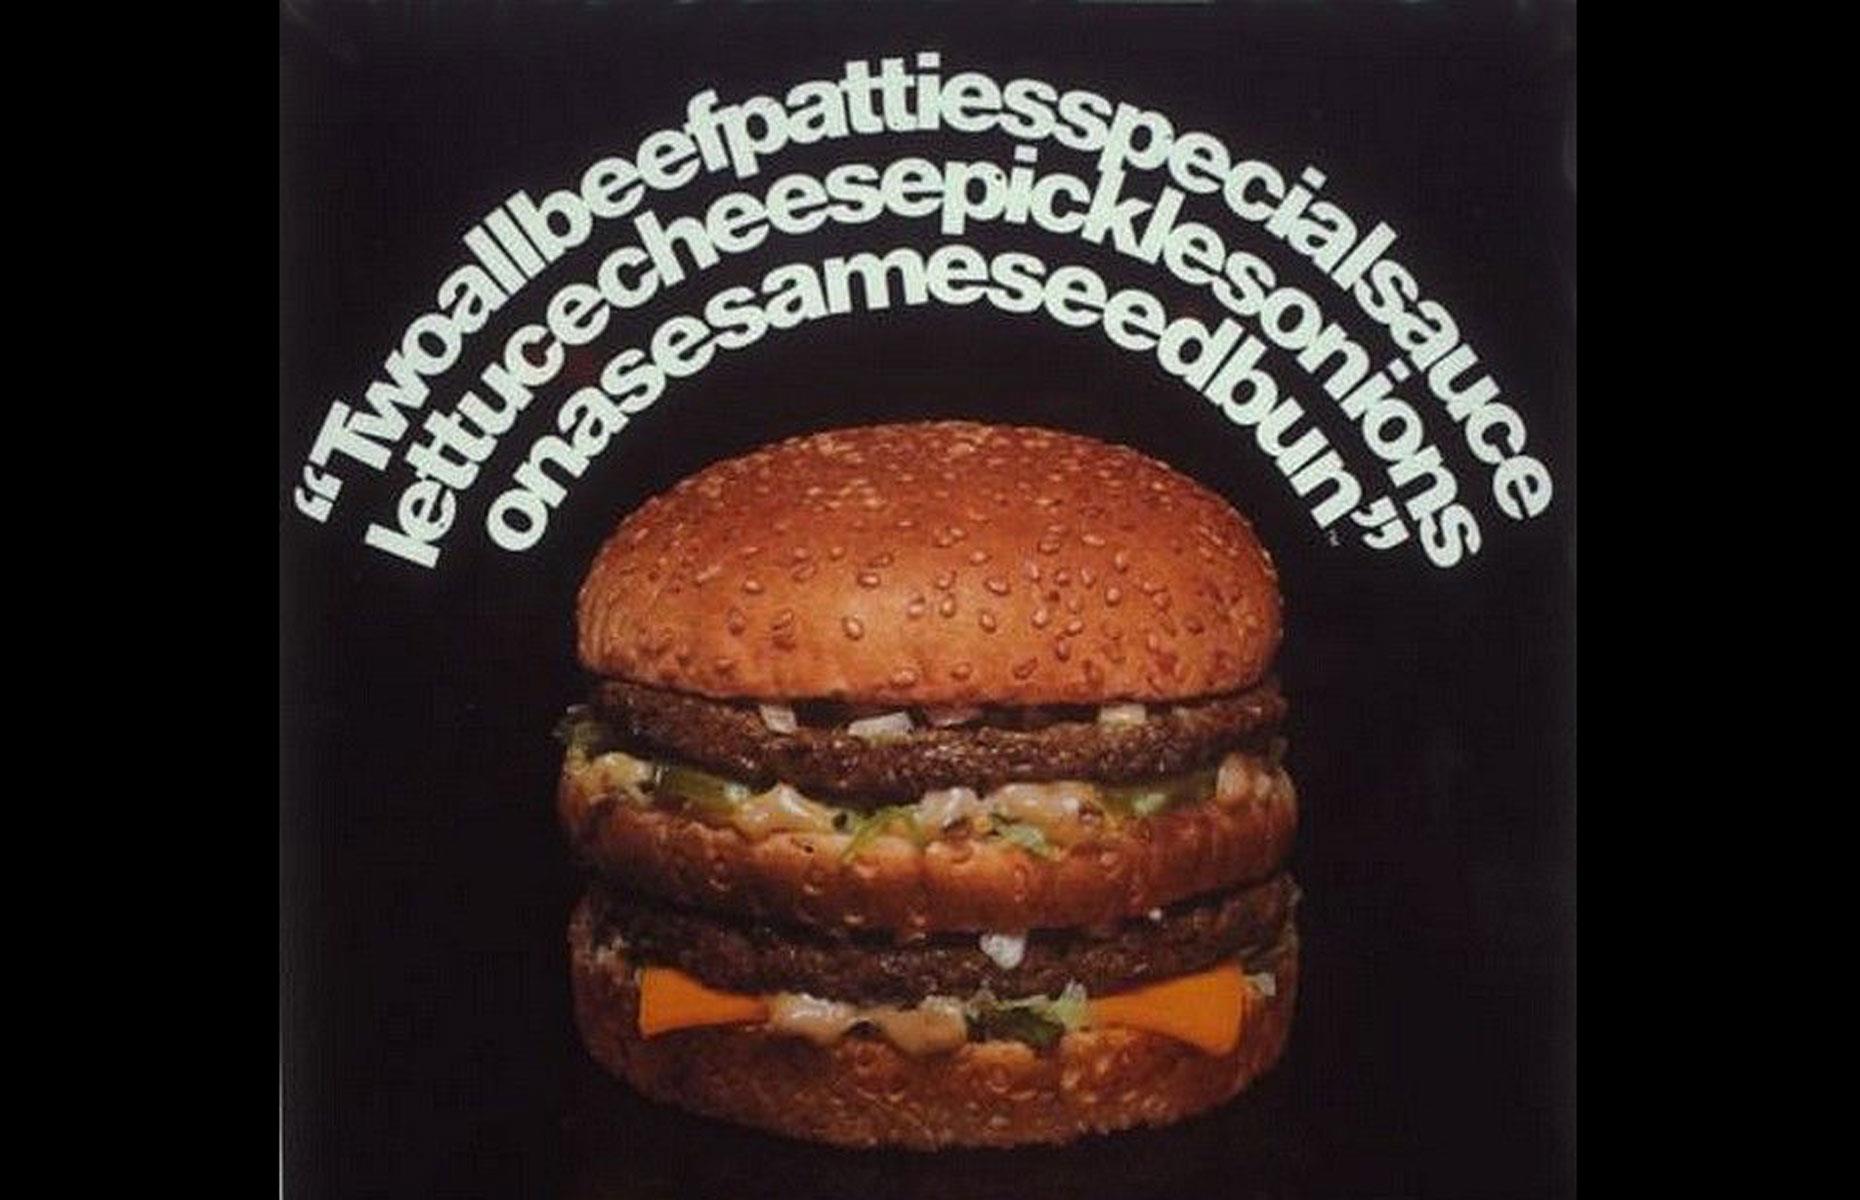 Two all-beef patties, special sauce, lettuce, cheese, pickles, onions, on a sesame seed bun – McDonald's